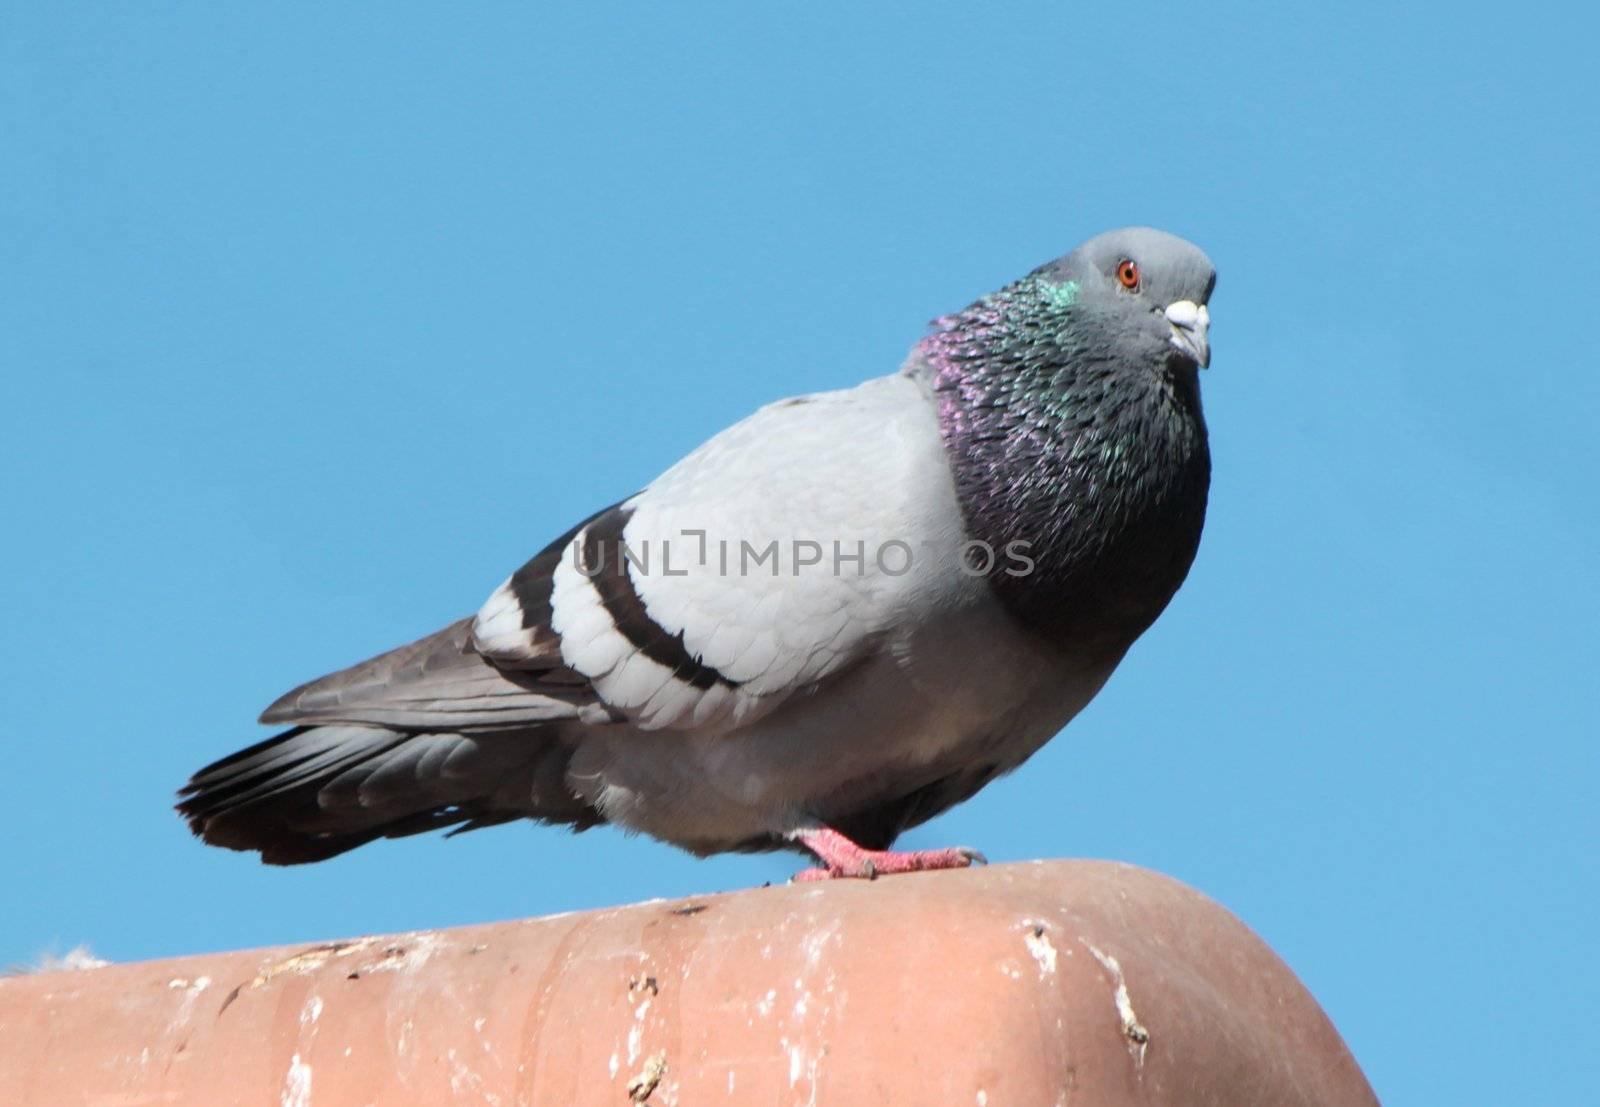 Grey pigeon standing on a red roof and blue sky